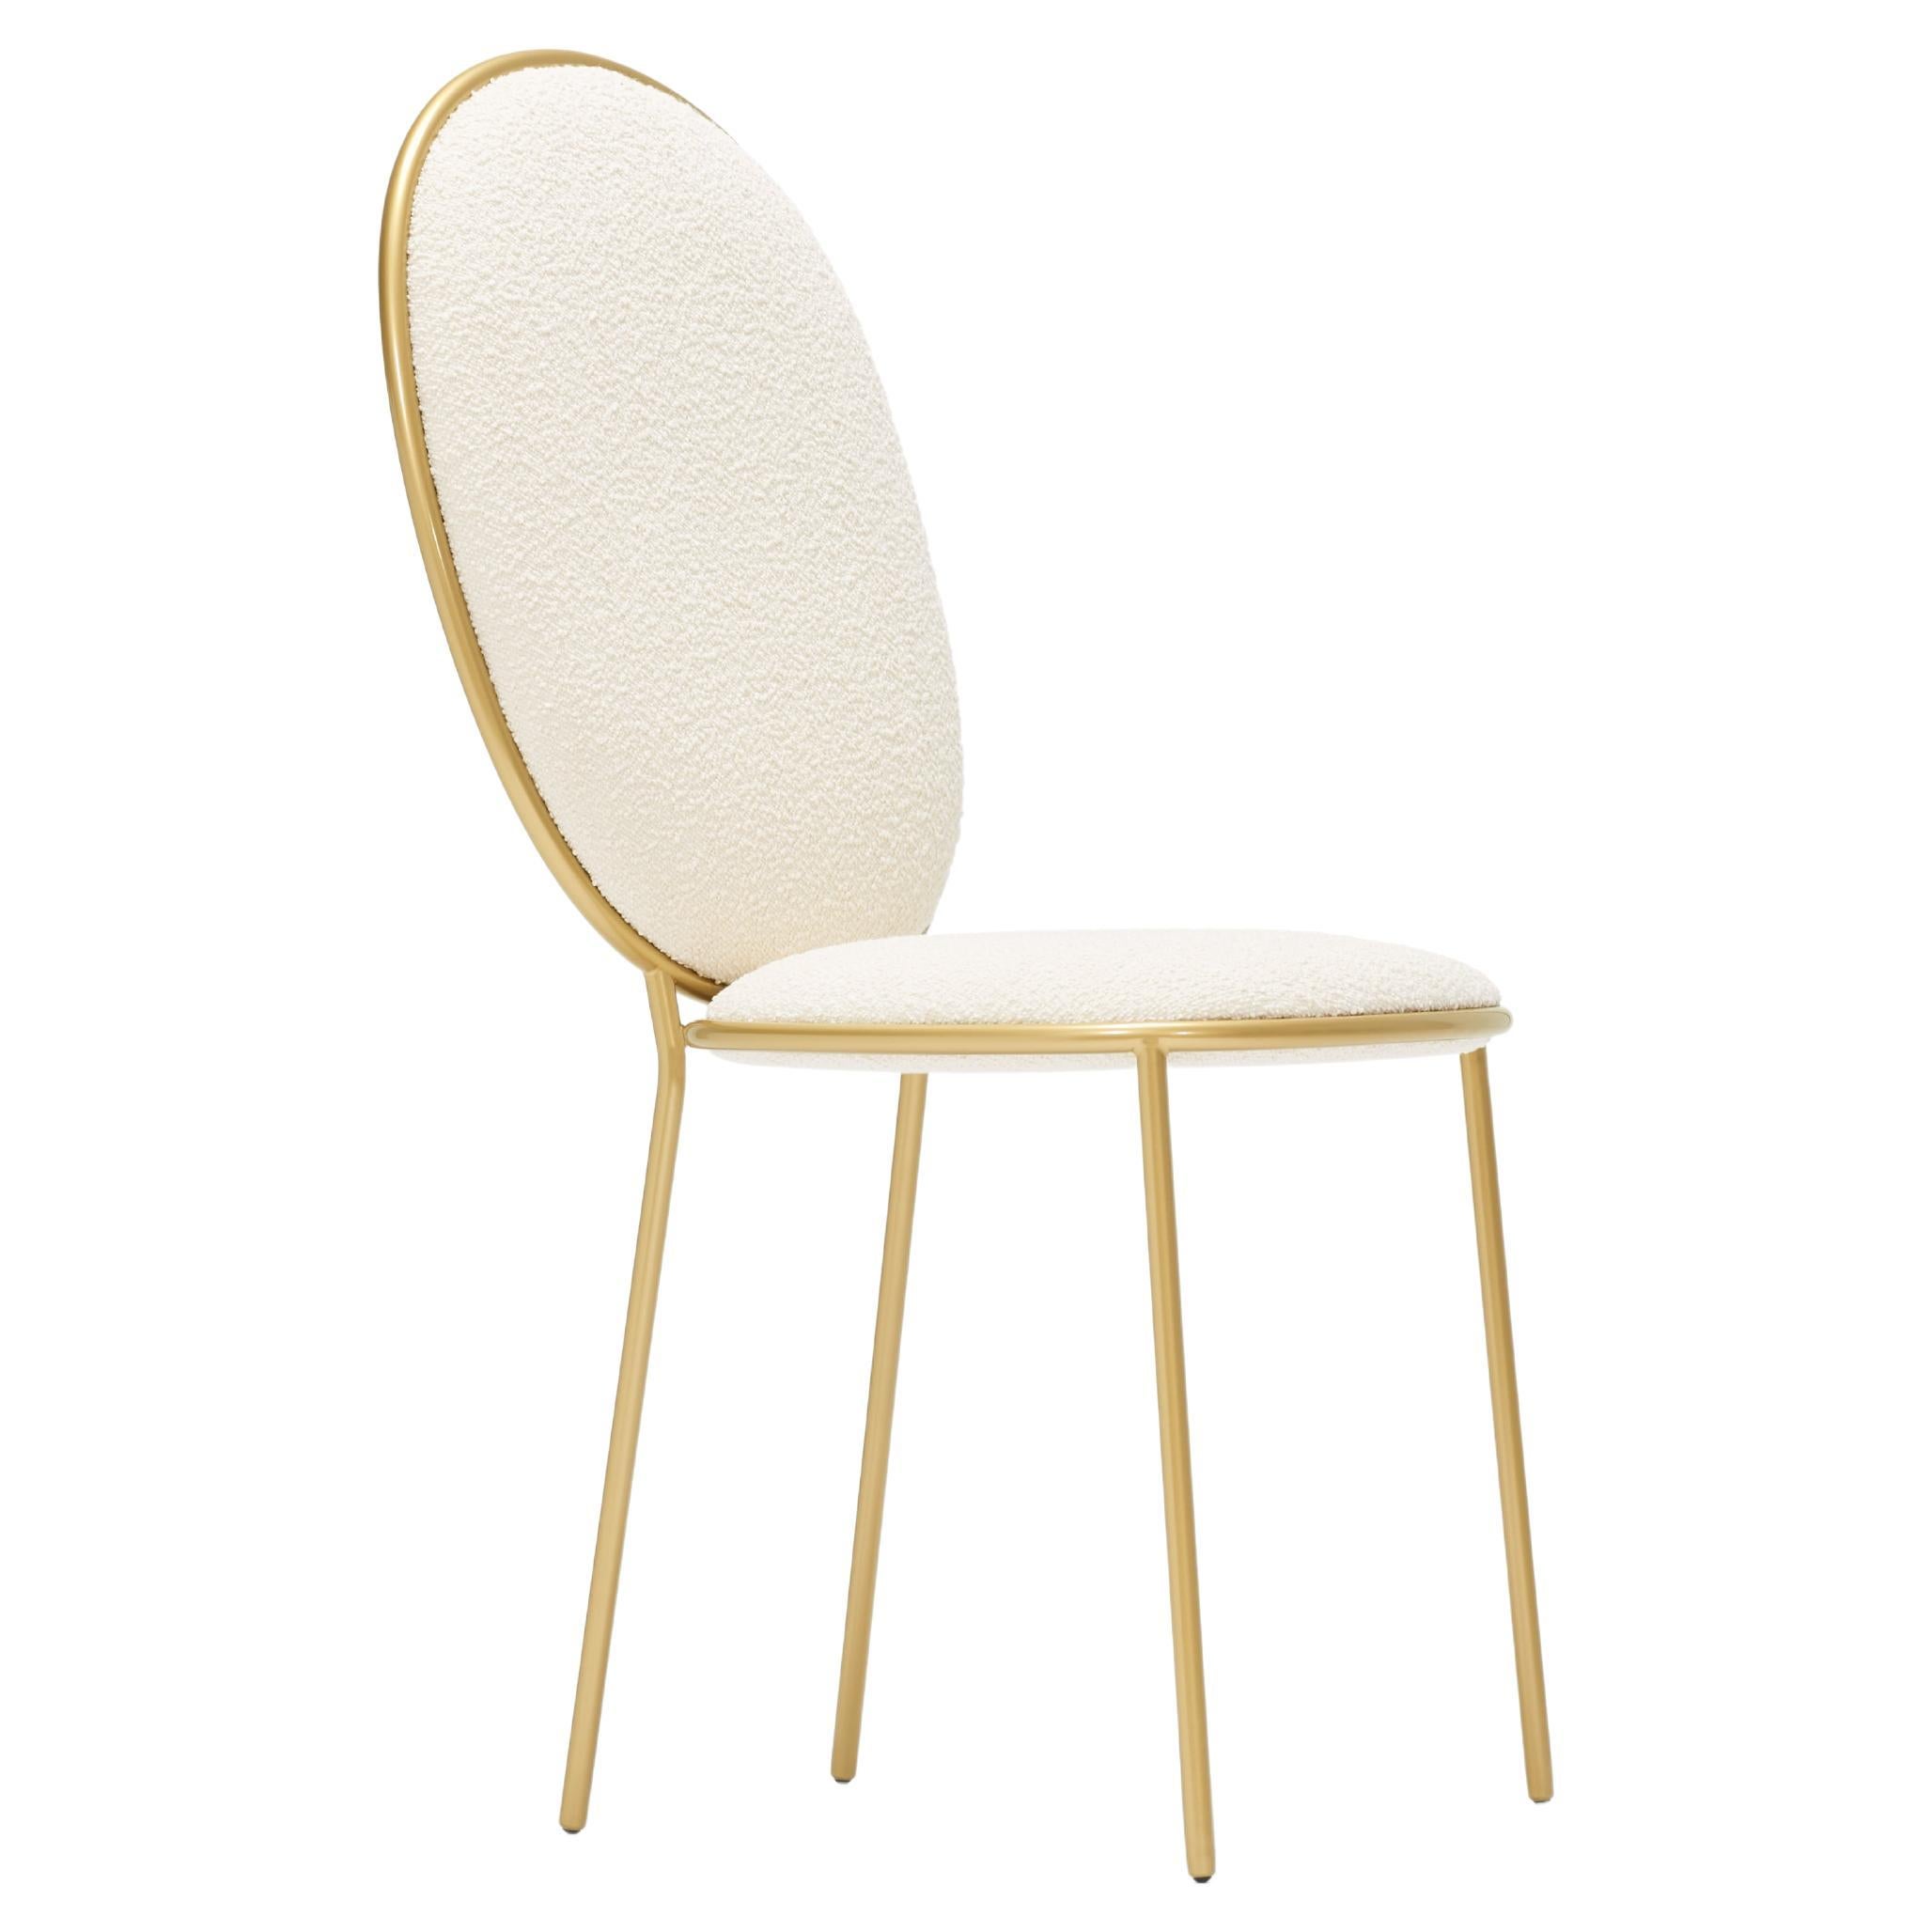 Contemporary Ivory Upholstered Dining Chair, Stay by Nika Zupanc